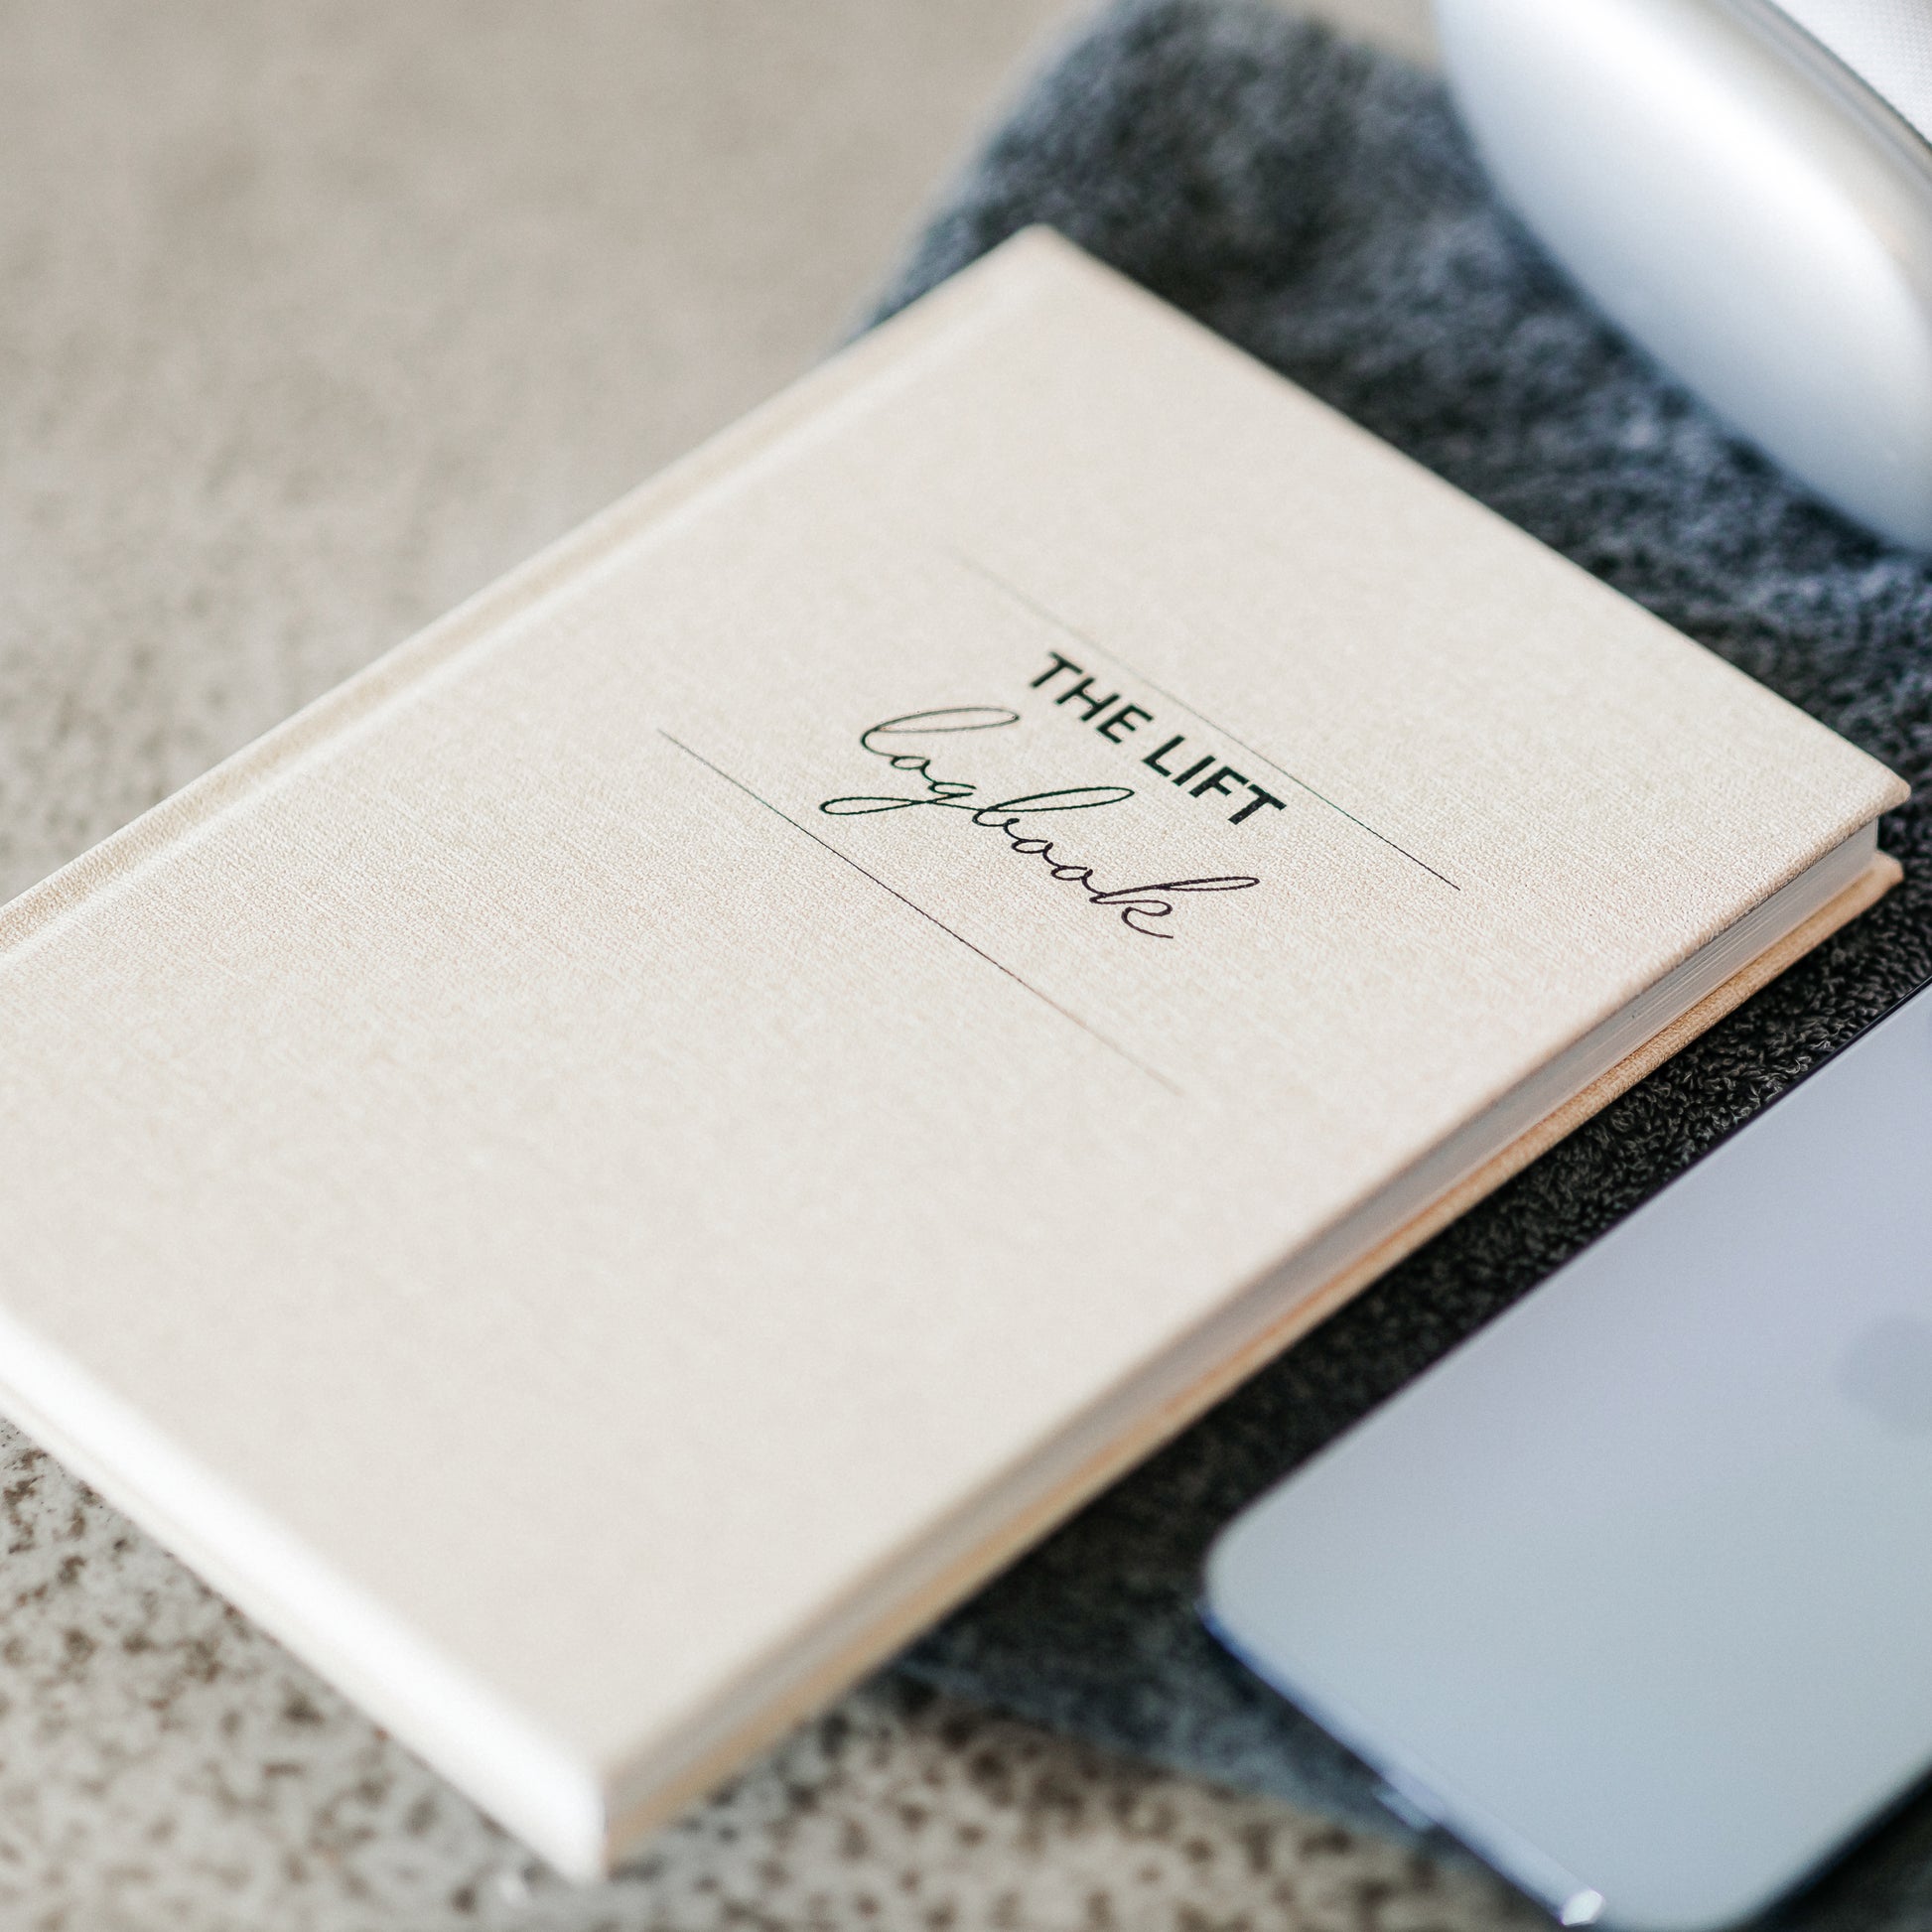 The Lift Logbook – The lift essentials